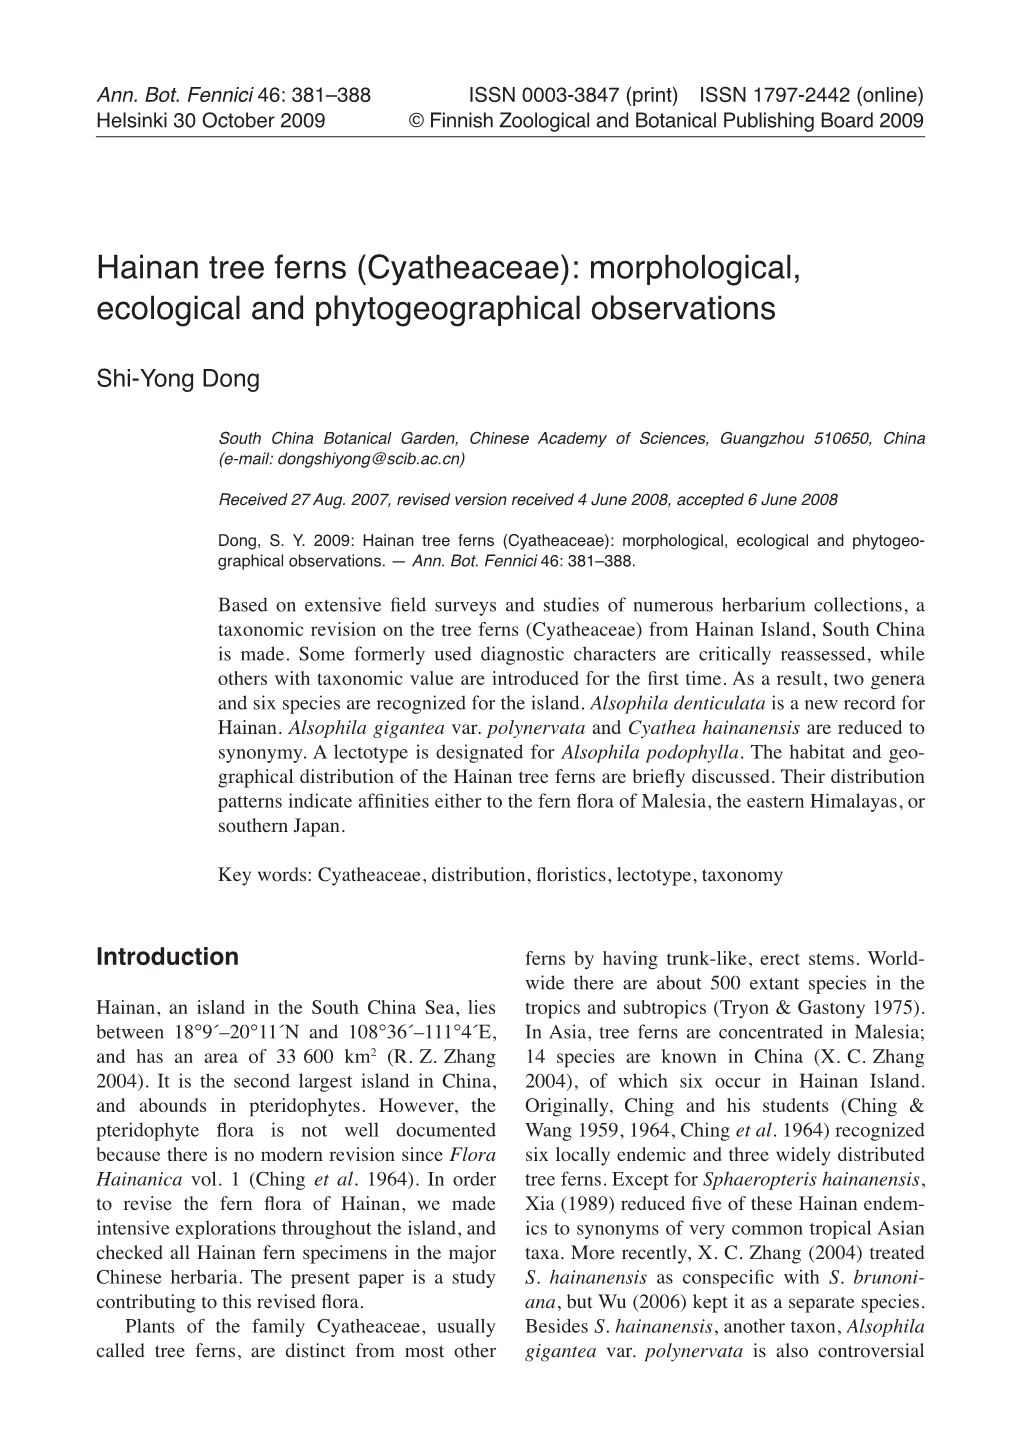 Hainan Tree Ferns (Cyatheaceae): Morphological, Ecological and Phytogeographical Observations